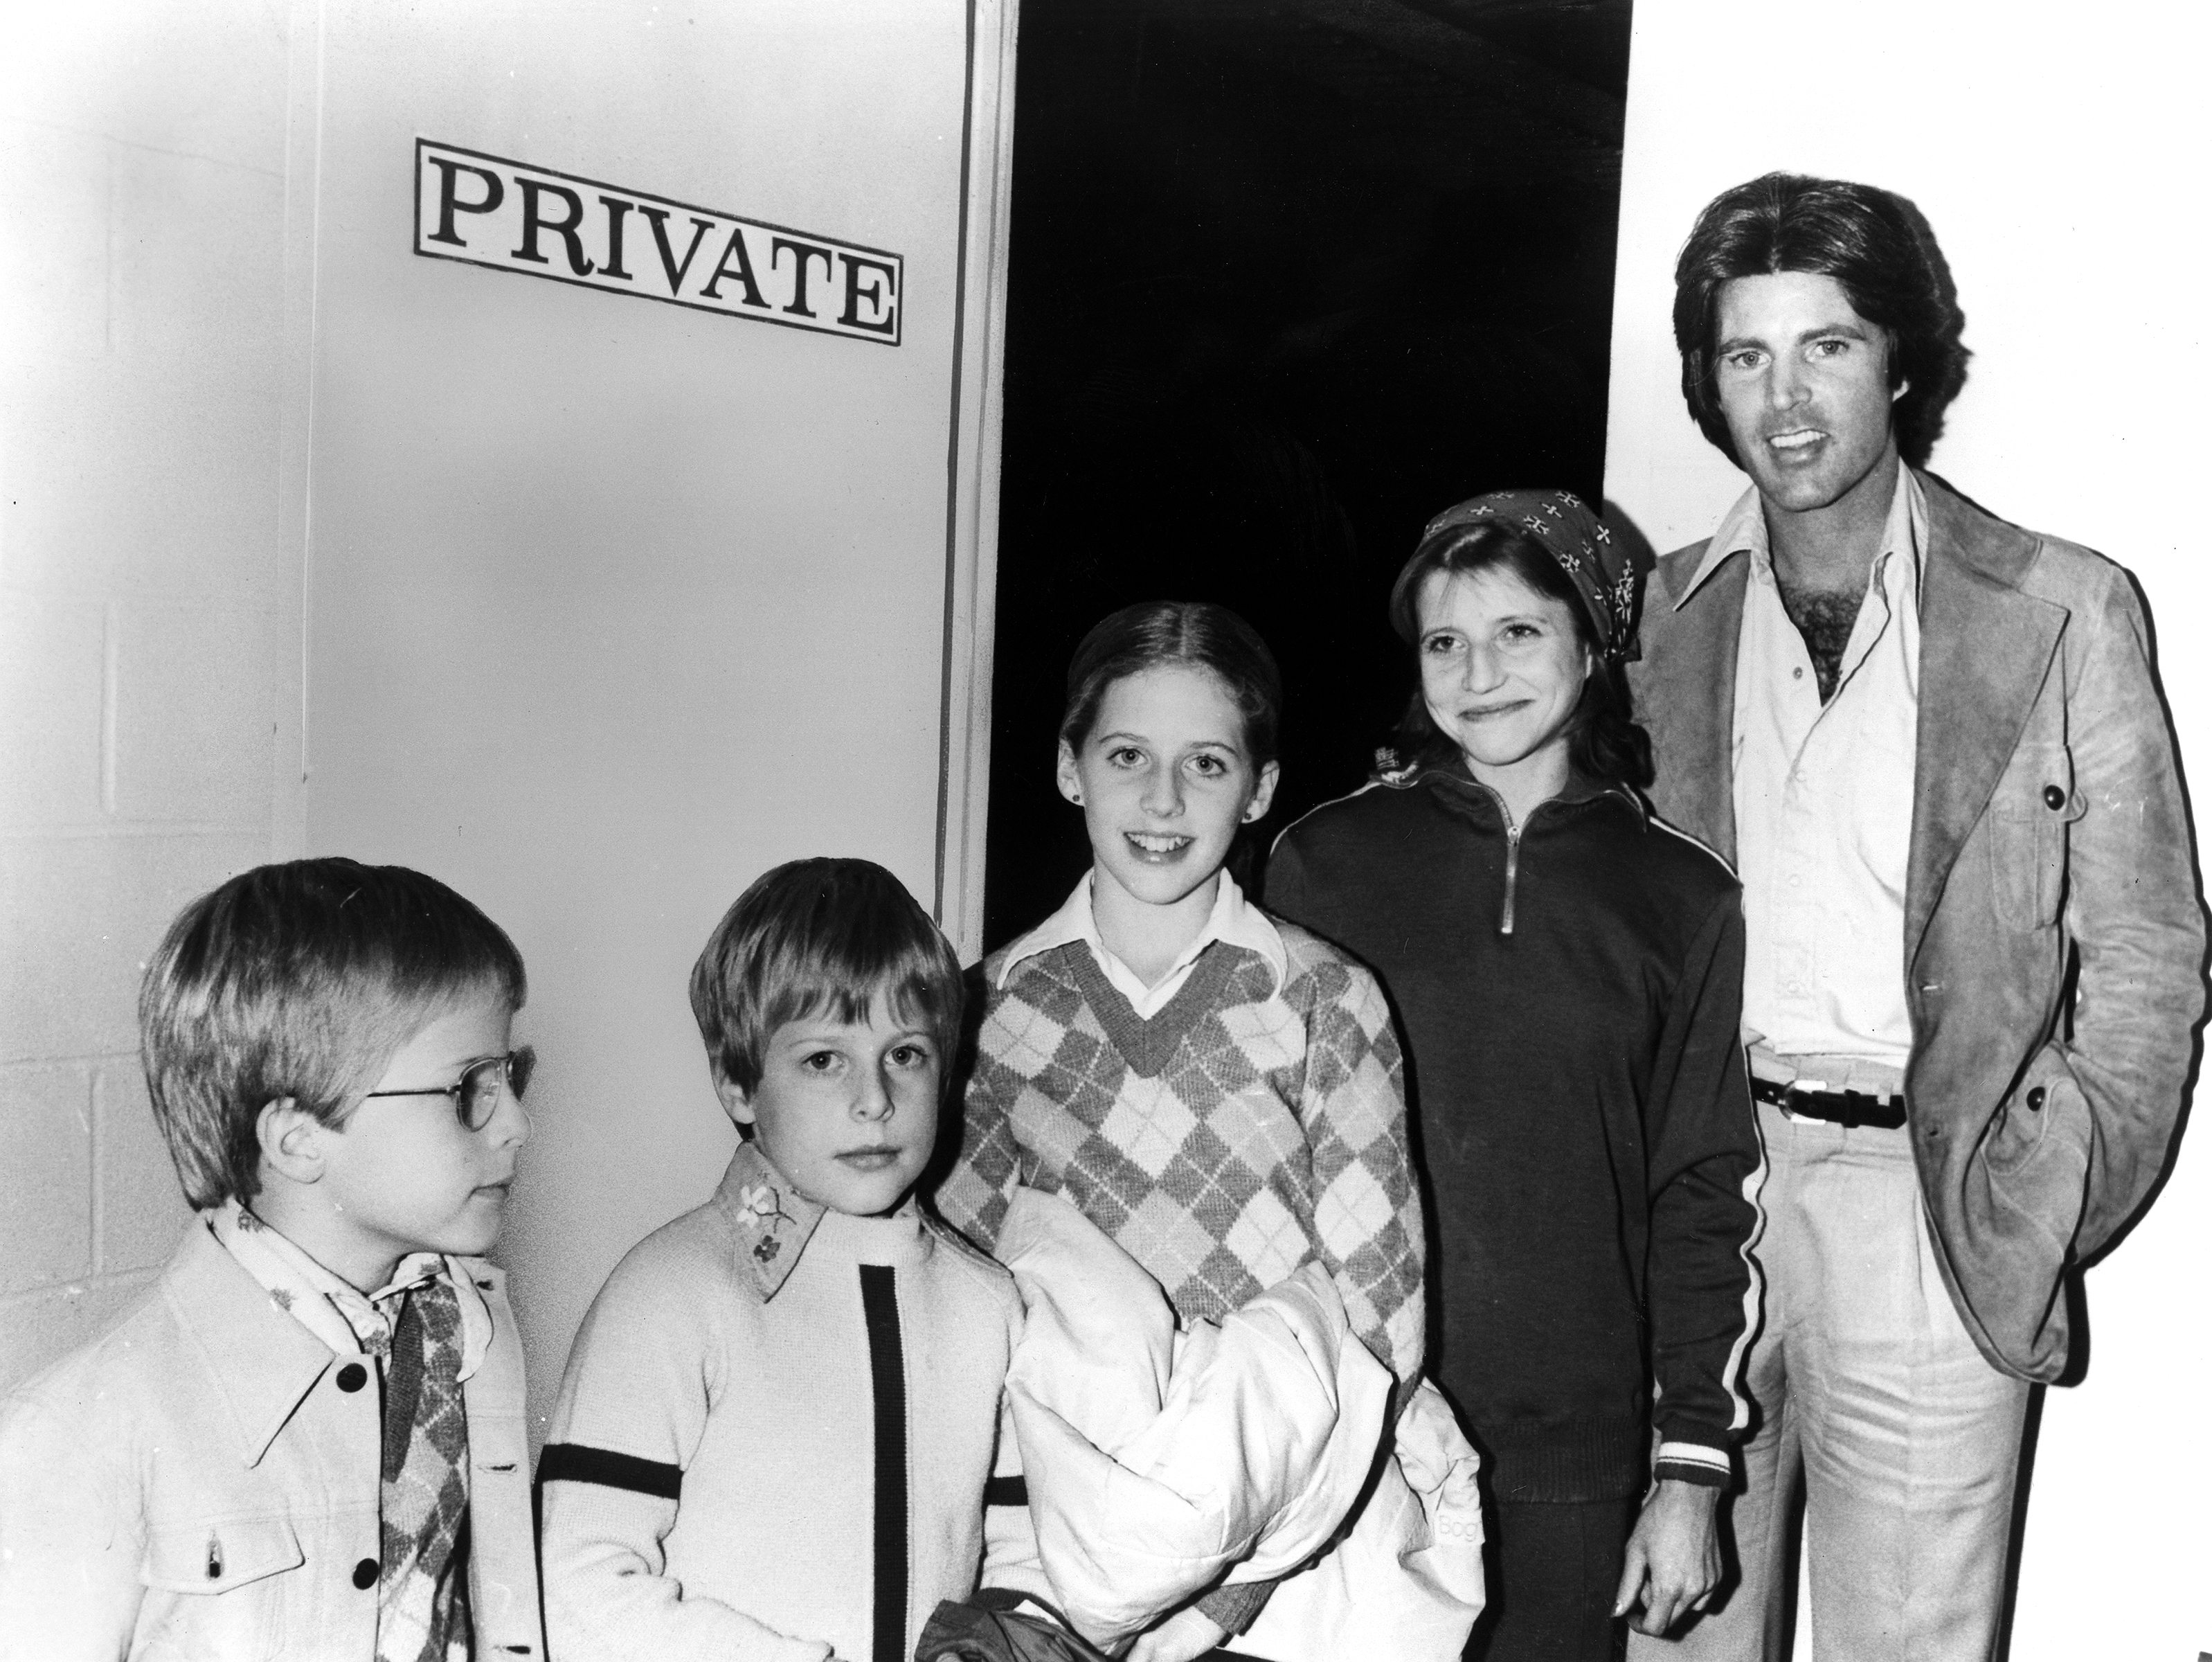 Twins Matthew Nelson and Gunnar Nelson, with their sister Tracy Nelson, Olympic gold medalist Olga Korbut, and pop singer Ricky Nelson posing for a portrait on January 1, 1976 | Source: Getty Images